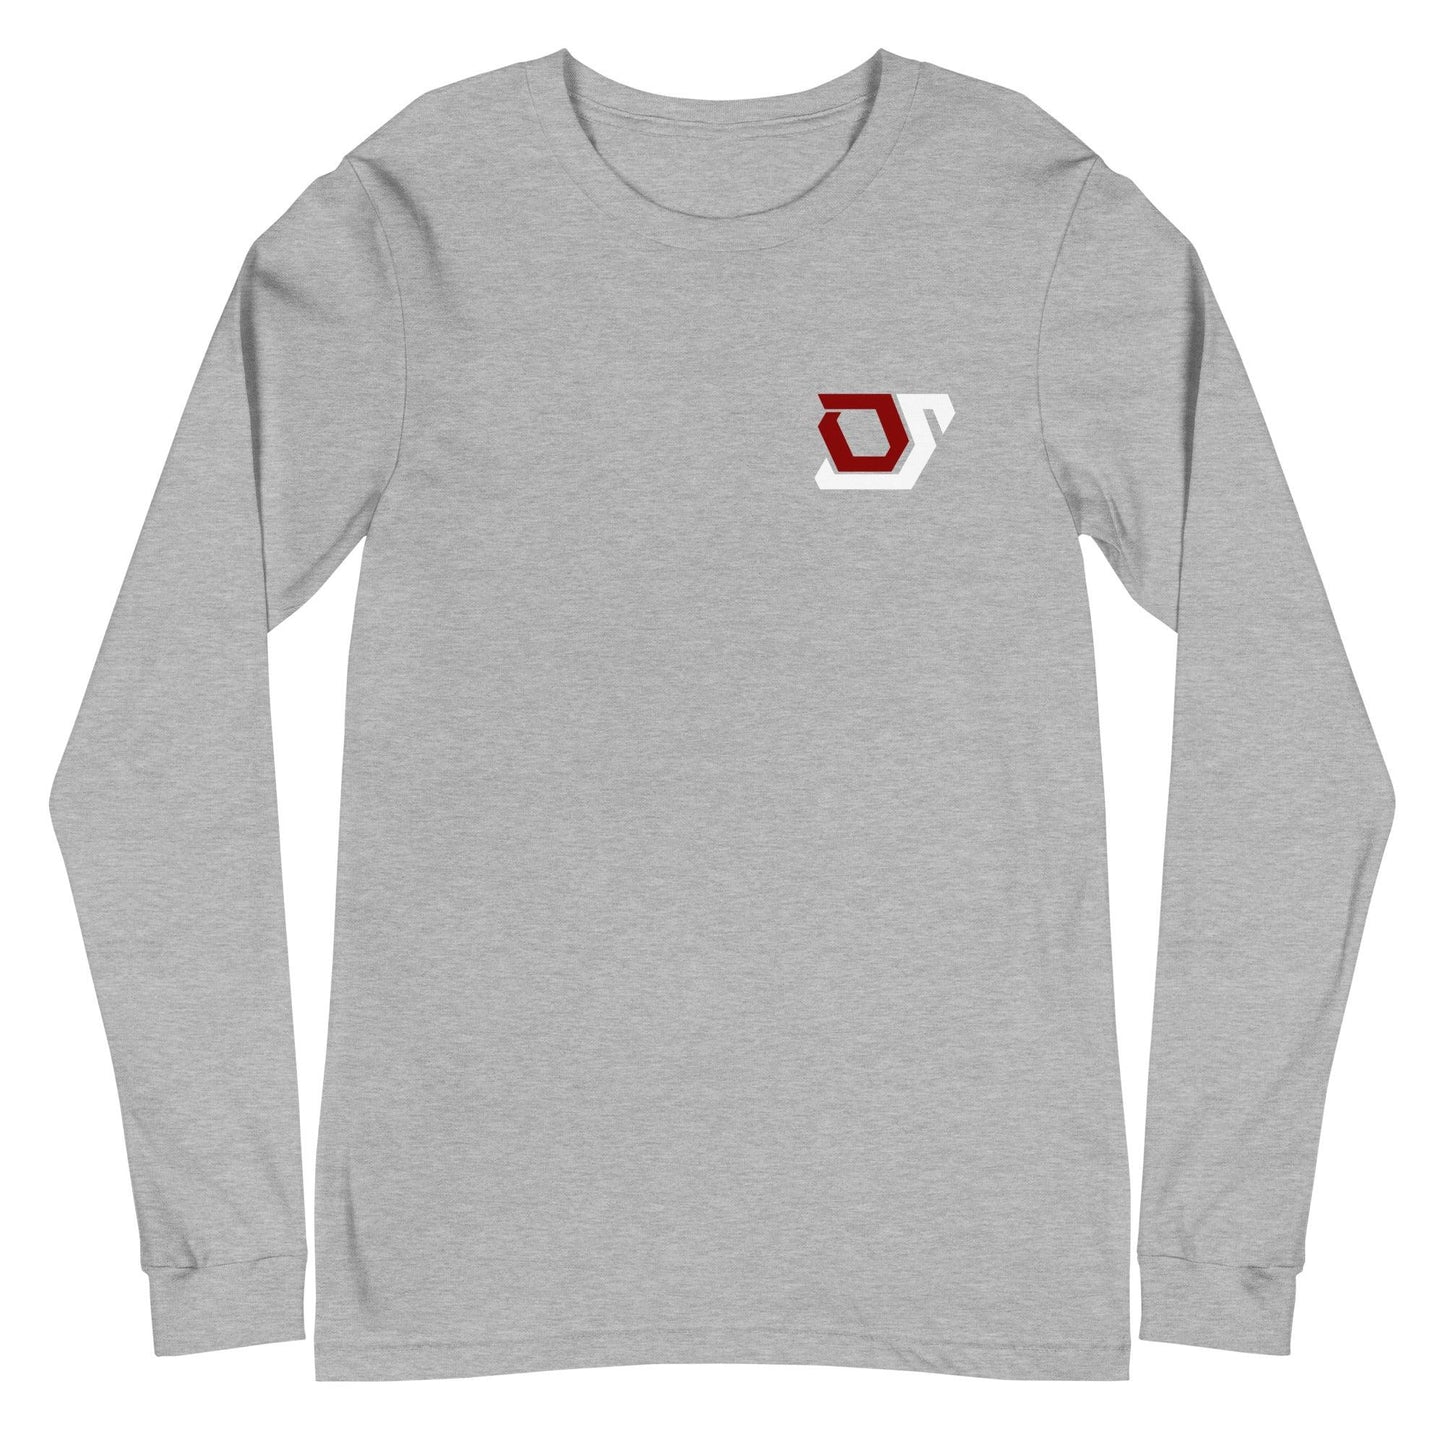 Daylan Smothers "Essentials" Long Sleeve Tee - Fan Arch